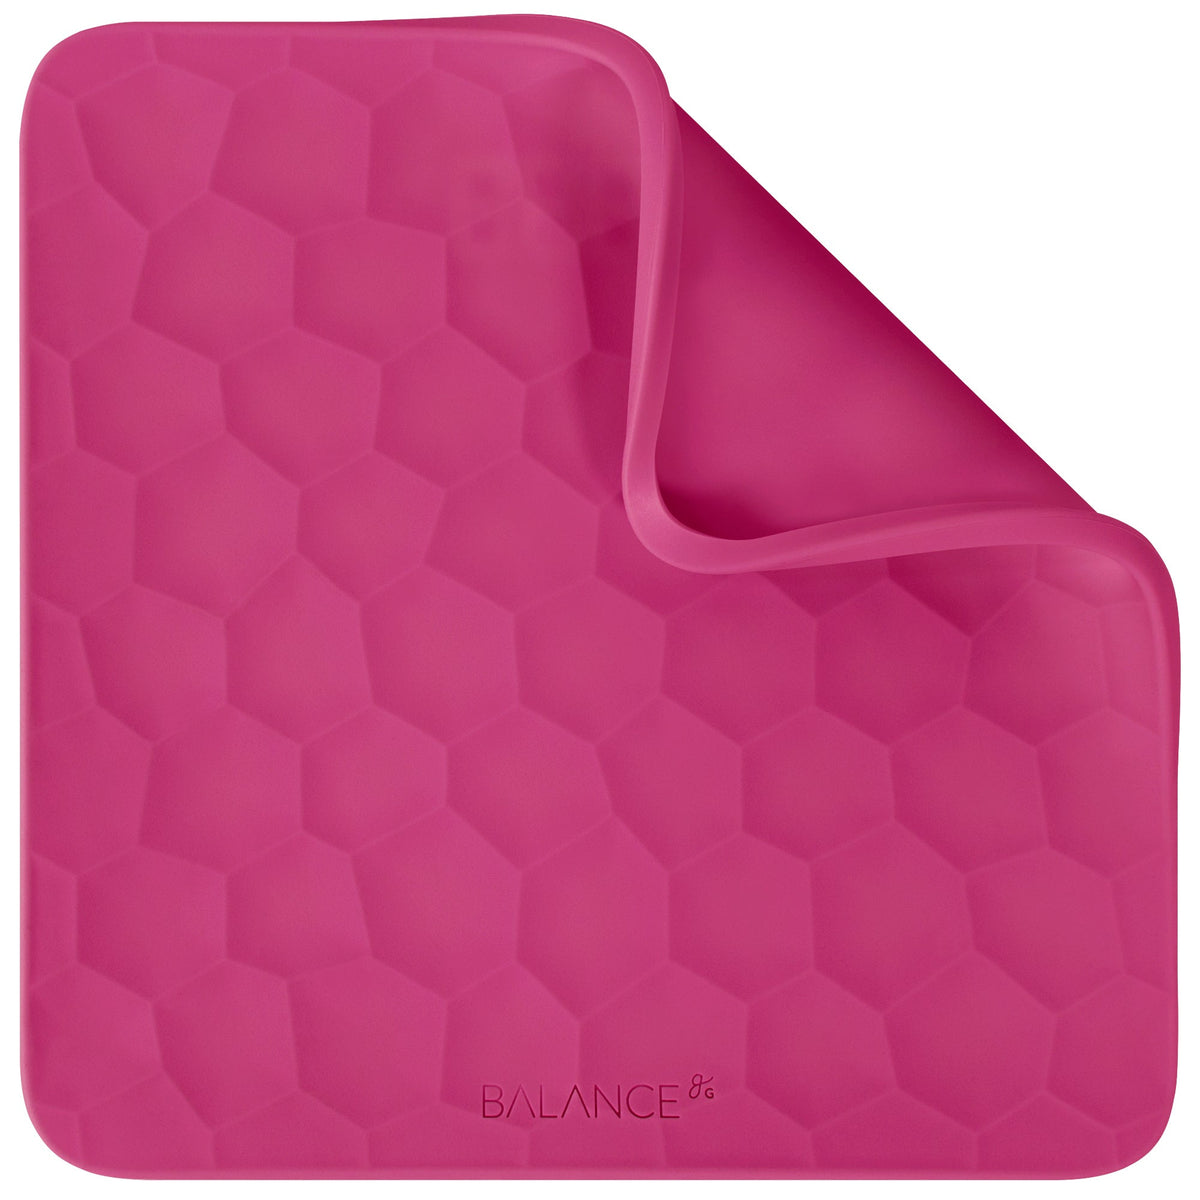 Bathroom Scale with Textured Silicone Cover, Dark Pink